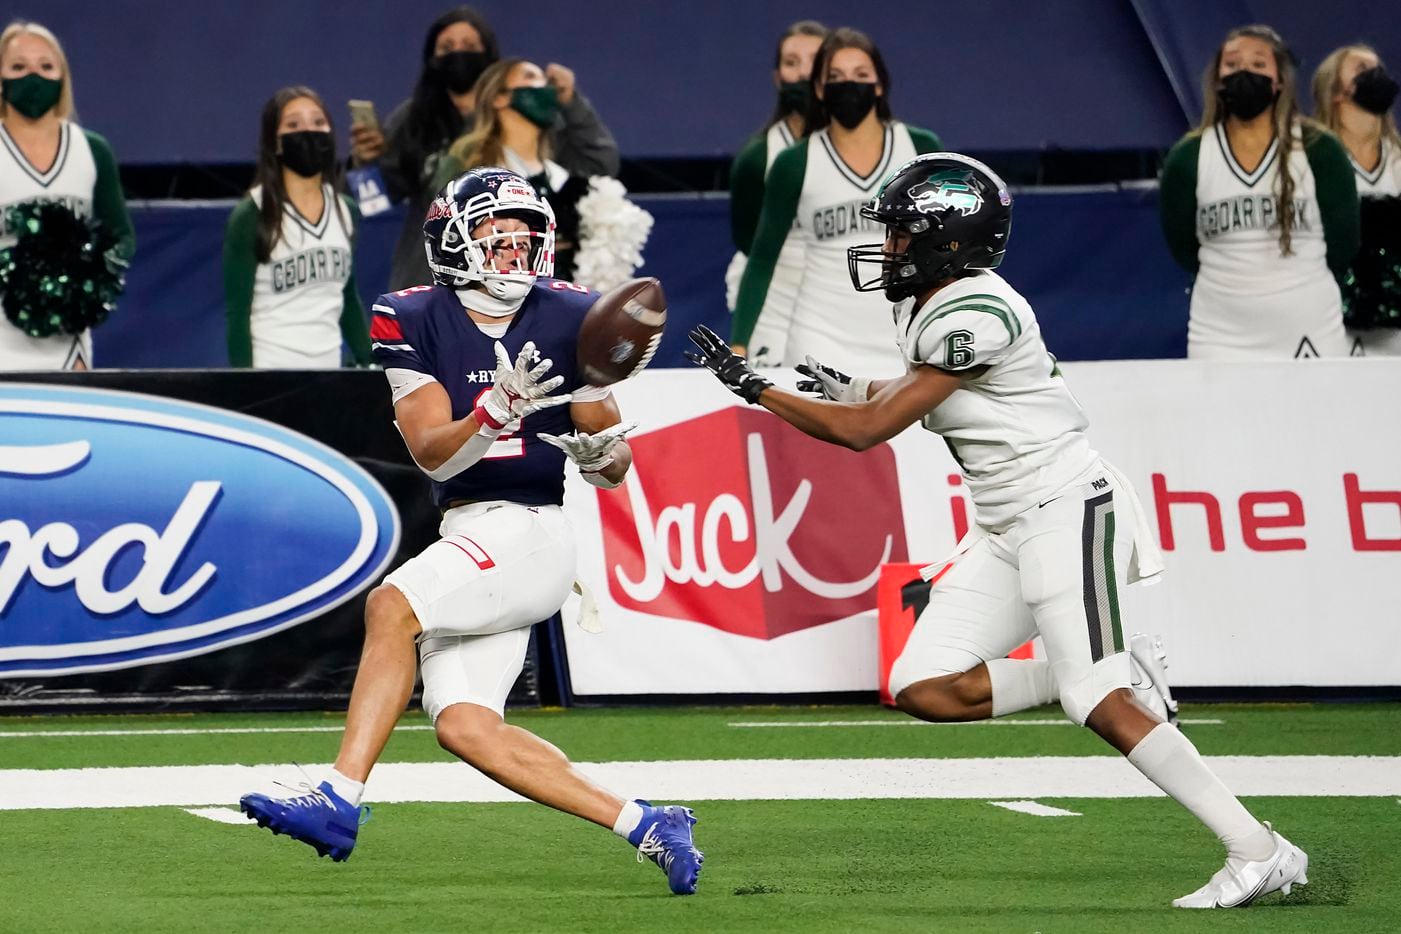 Denton Ryan Billy Bowman Jr. (2) hauls in a 37-yard touchdown pass from quarterback Seth Henigan as Cedar Park defensive back Michael Putney (6) defends during the first half of the Class 5A Division I state football championship game at AT&T Stadium on Friday, Jan. 15, 2021, in Arlington, Texas. (Smiley N. Pool/The Dallas Morning News)